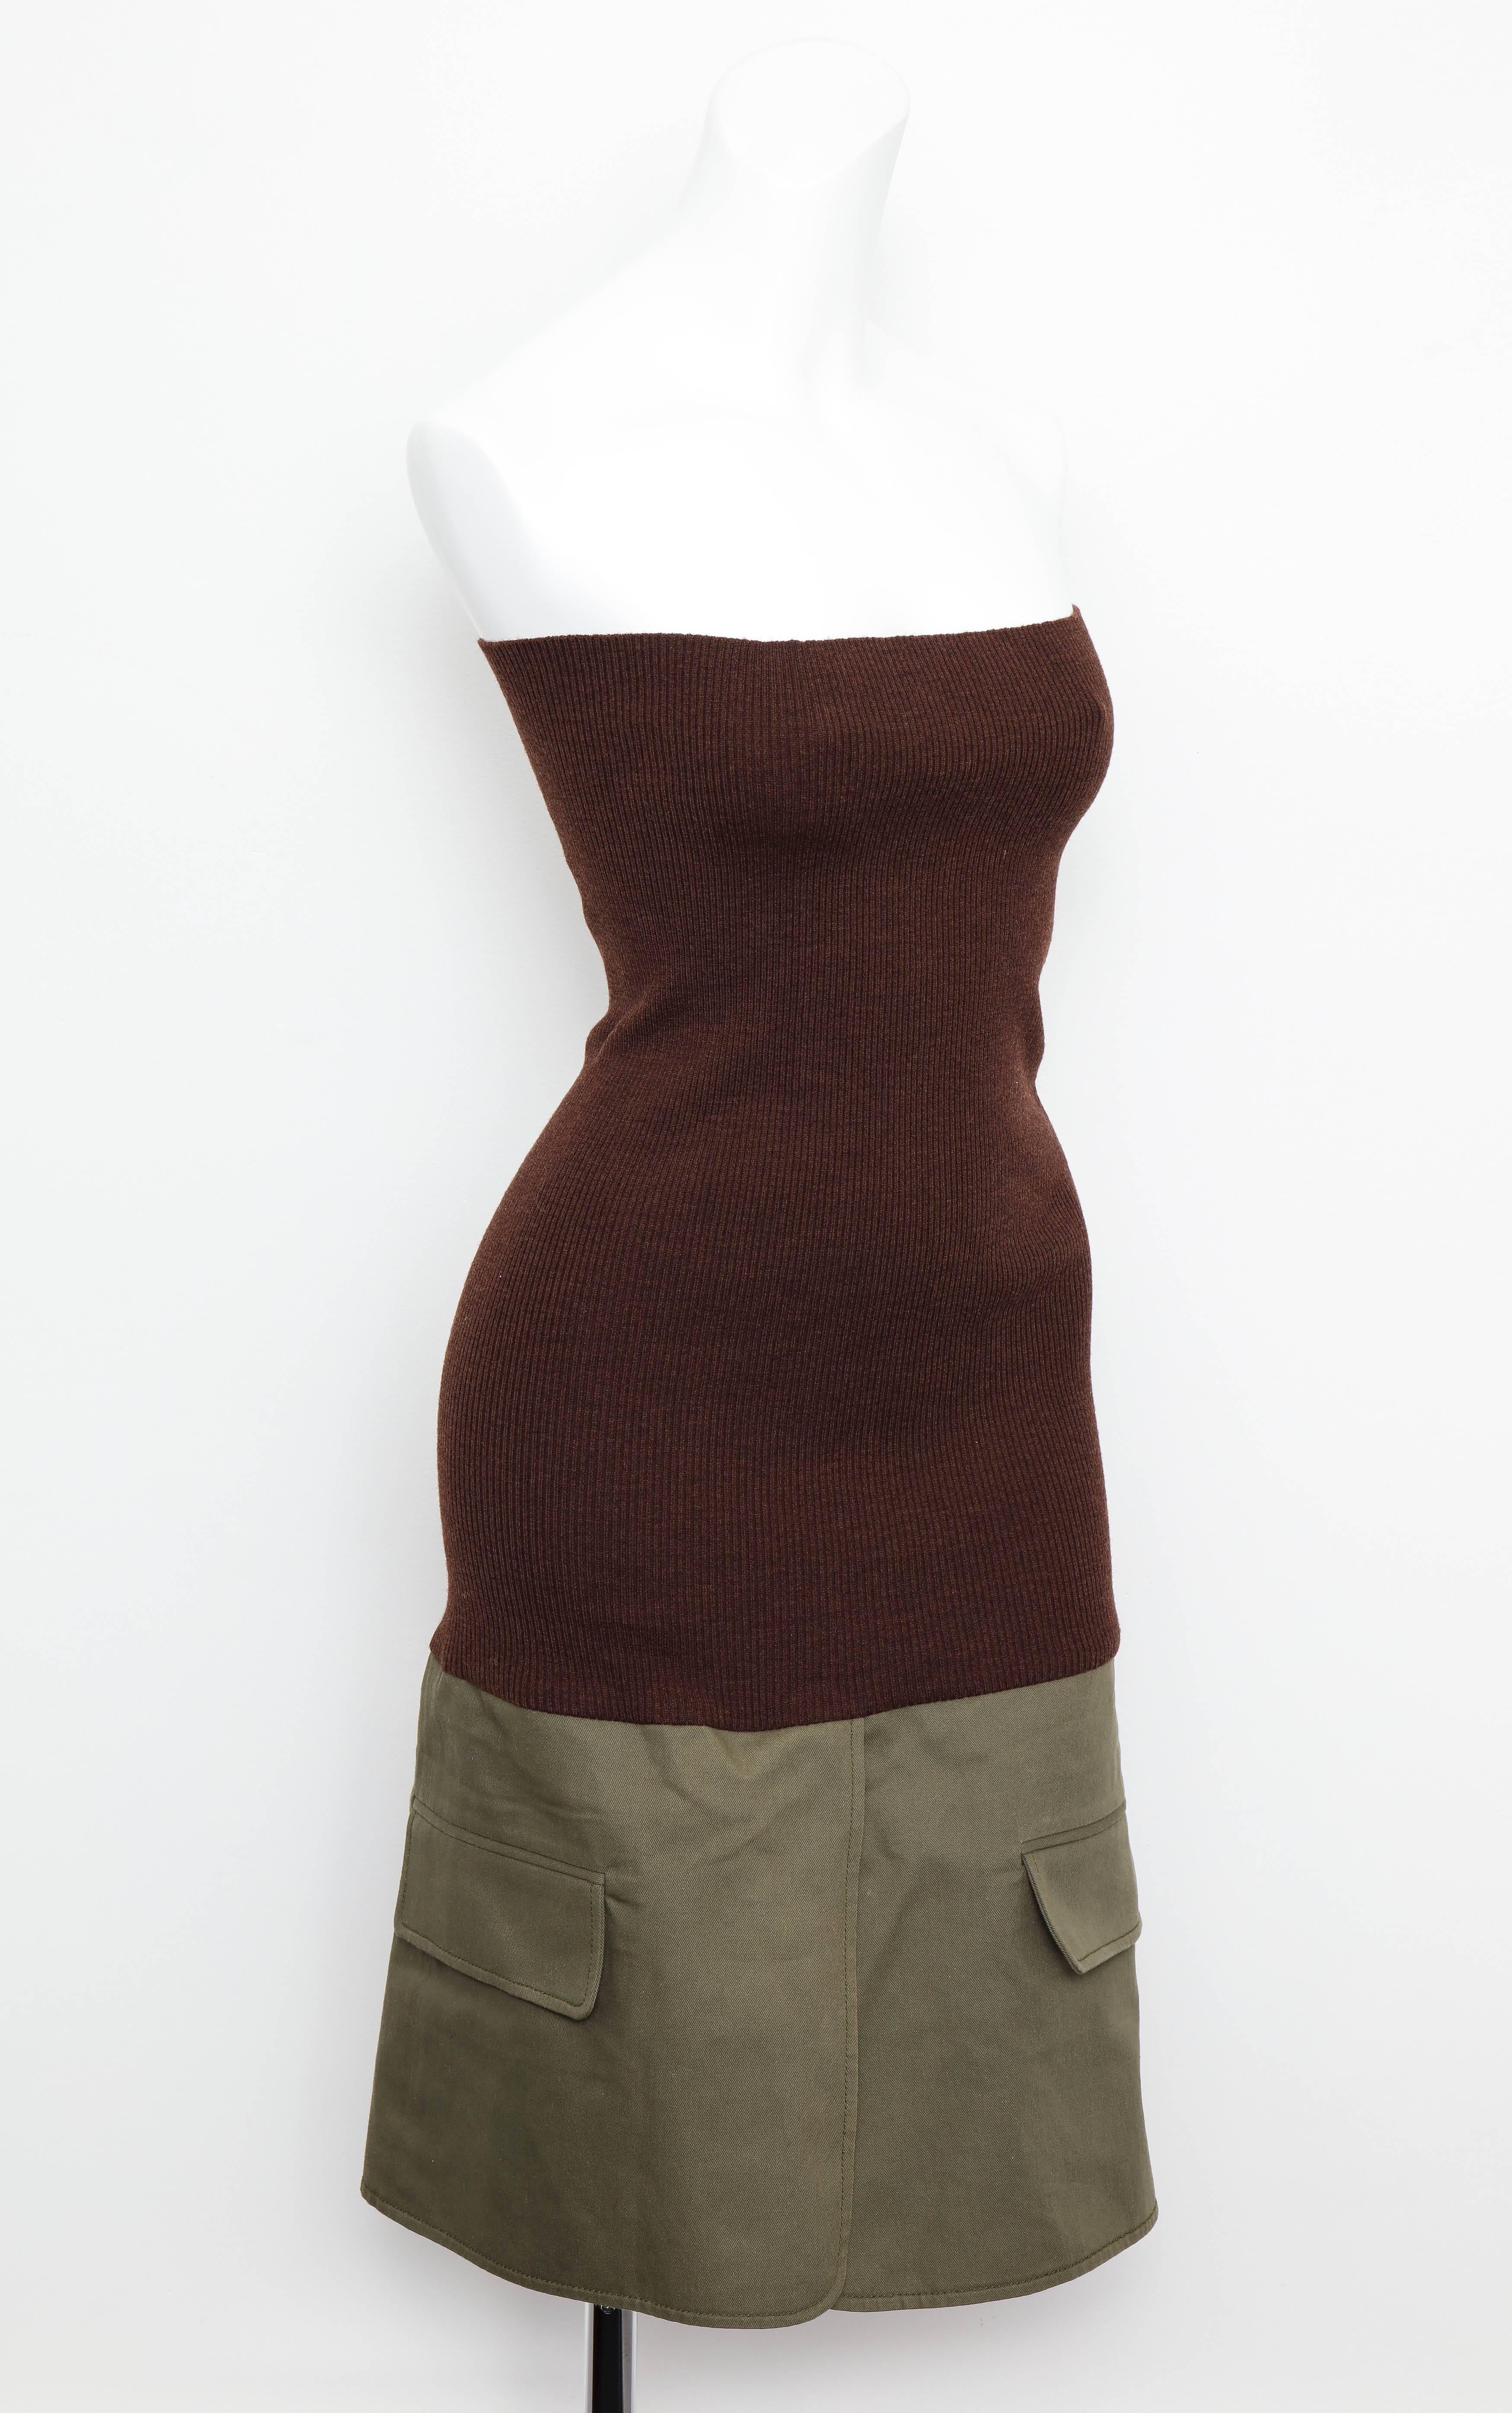 Very rare Christian Dior tube dress with knit and khaki fabric. 

Size FR 36.

Chest 26 inches (the knit has lots of elasticity)
Total length 32 inches